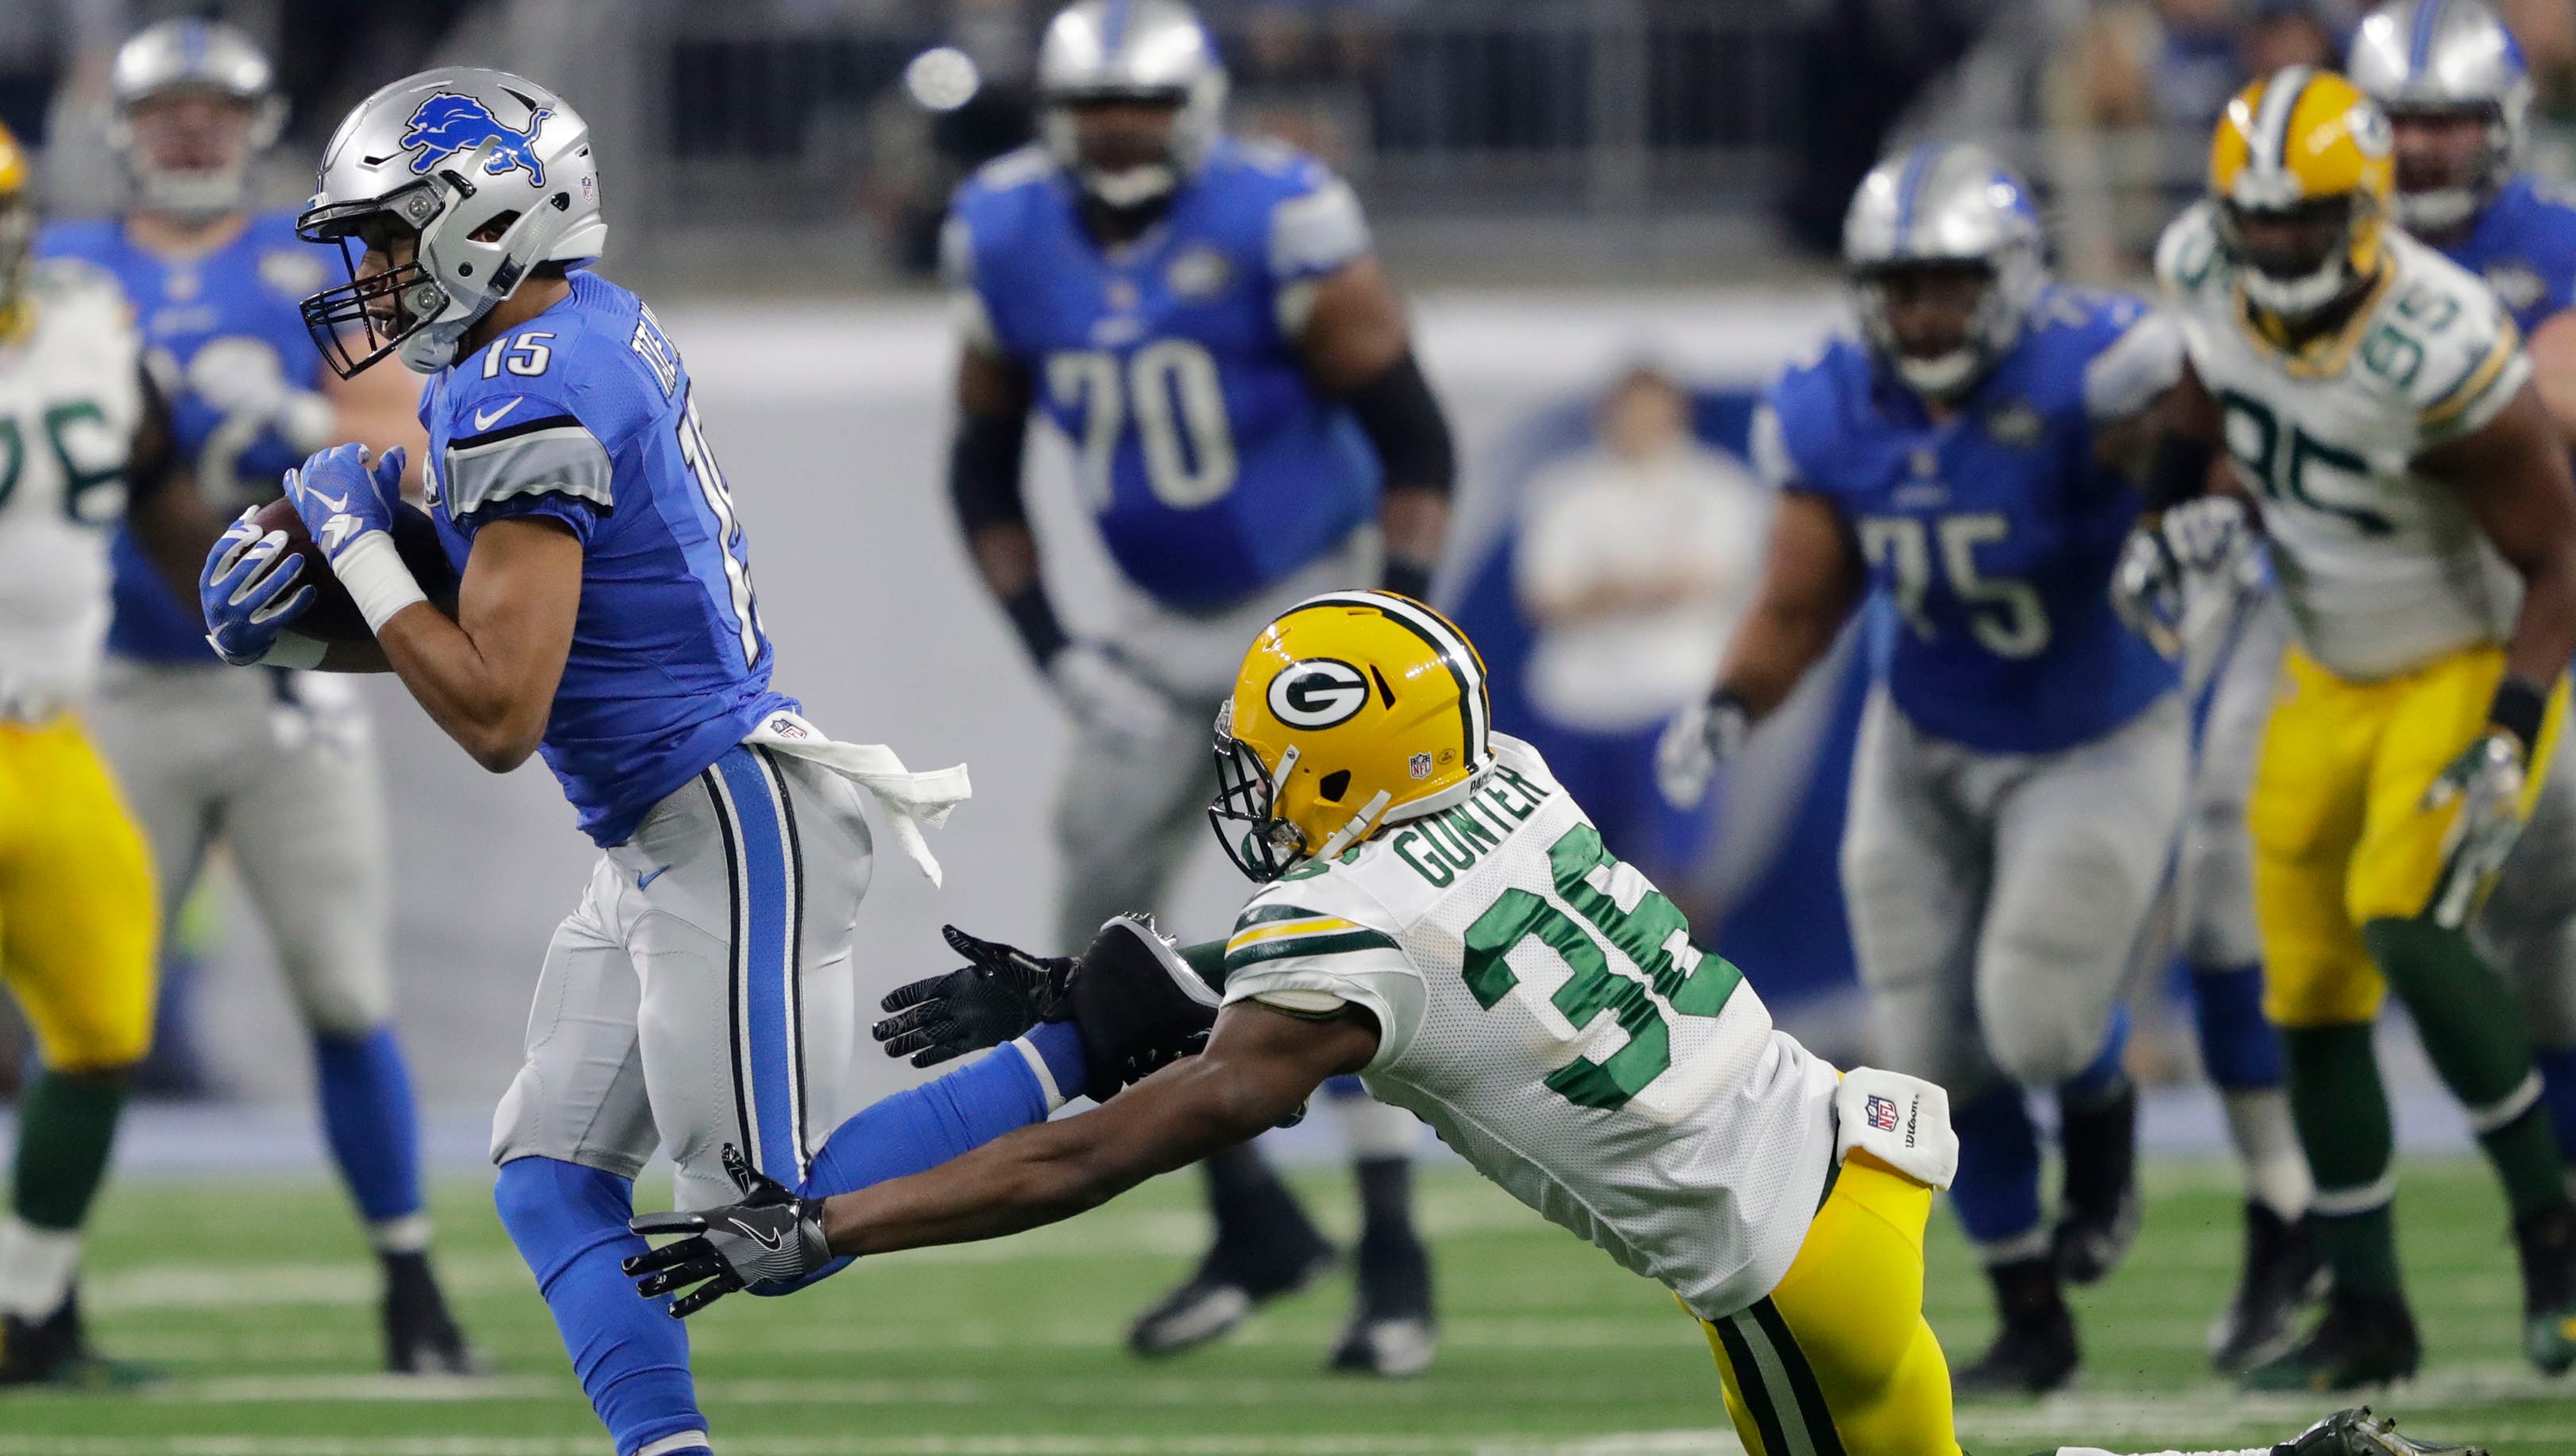 Golden Tate gets past LaDarius Gunter for a first down reception.